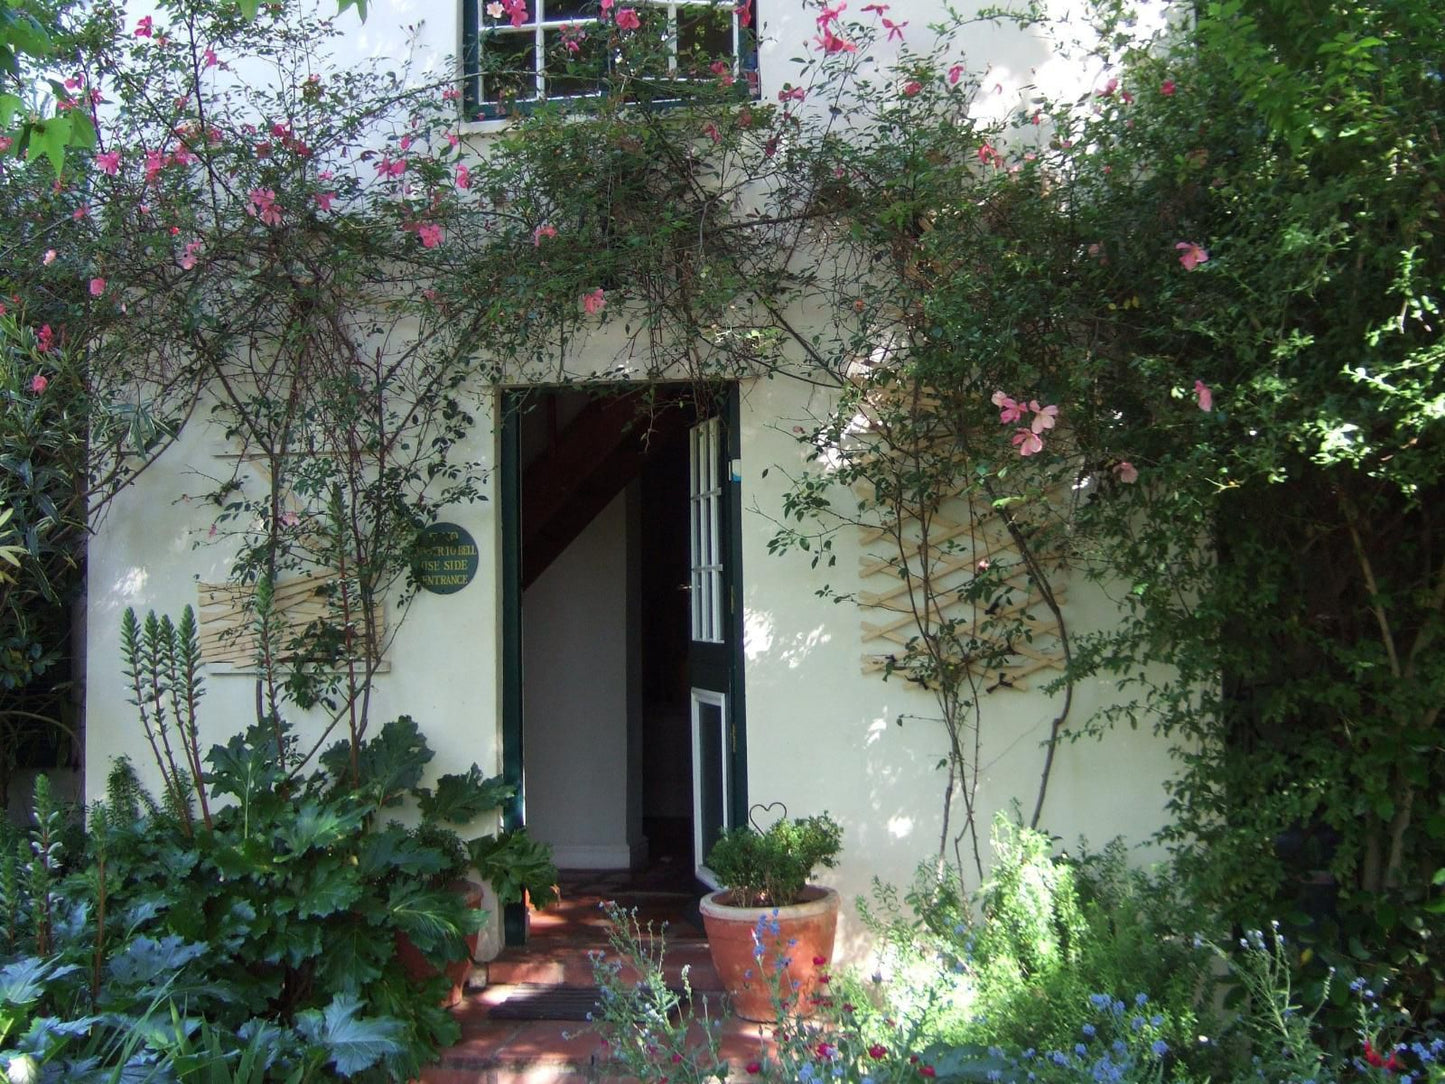 High Hopes Retreats And Guest House Greyton Western Cape South Africa House, Building, Architecture, Plant, Nature, Garden